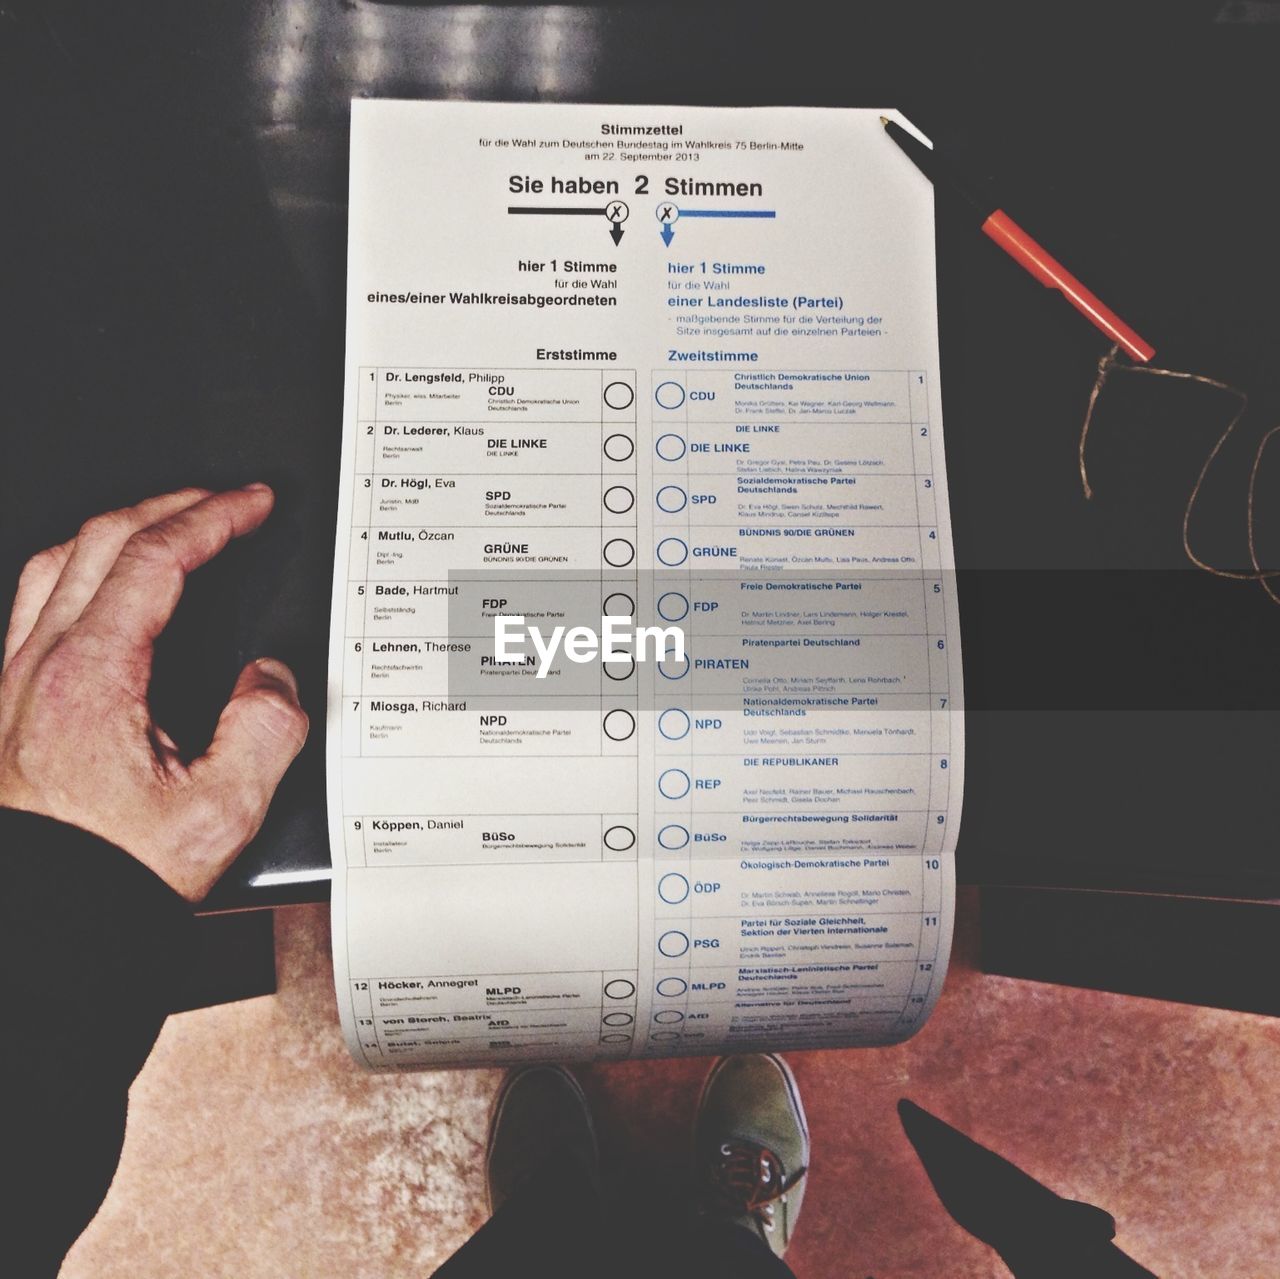 Close-up of voting ballot paper